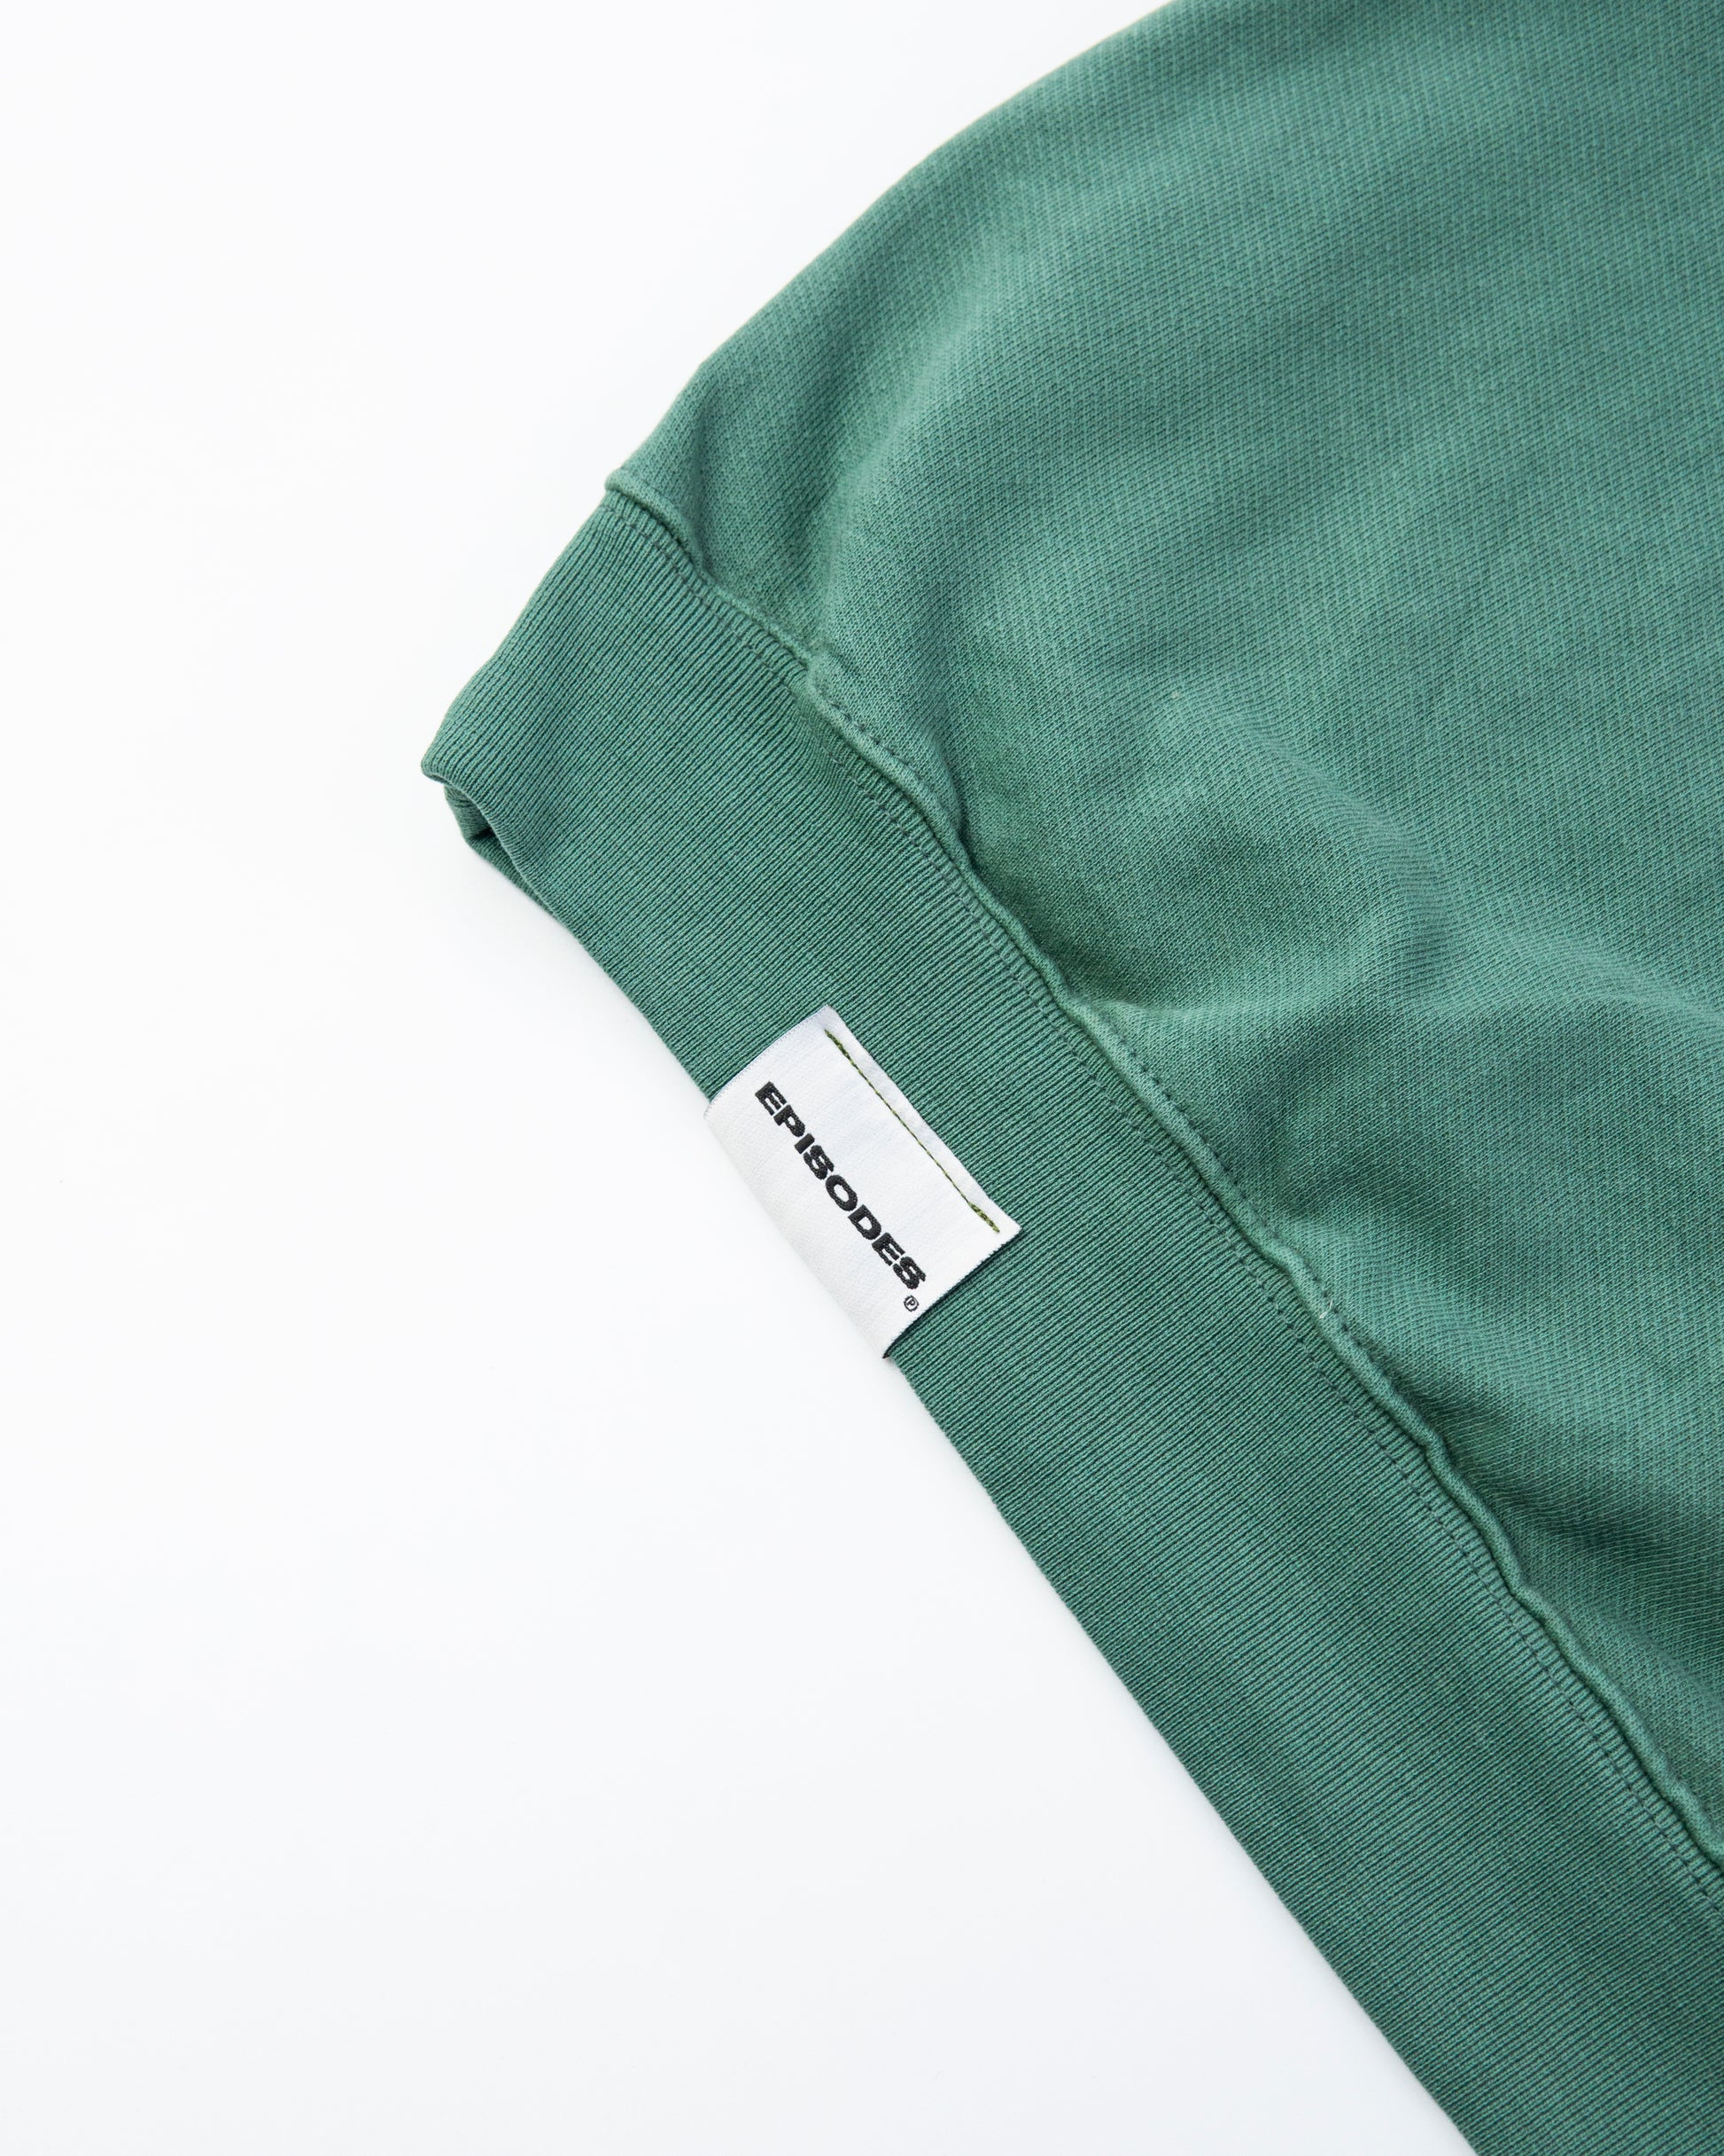 Episodes Puff Hoodie Green - The Episodes Project